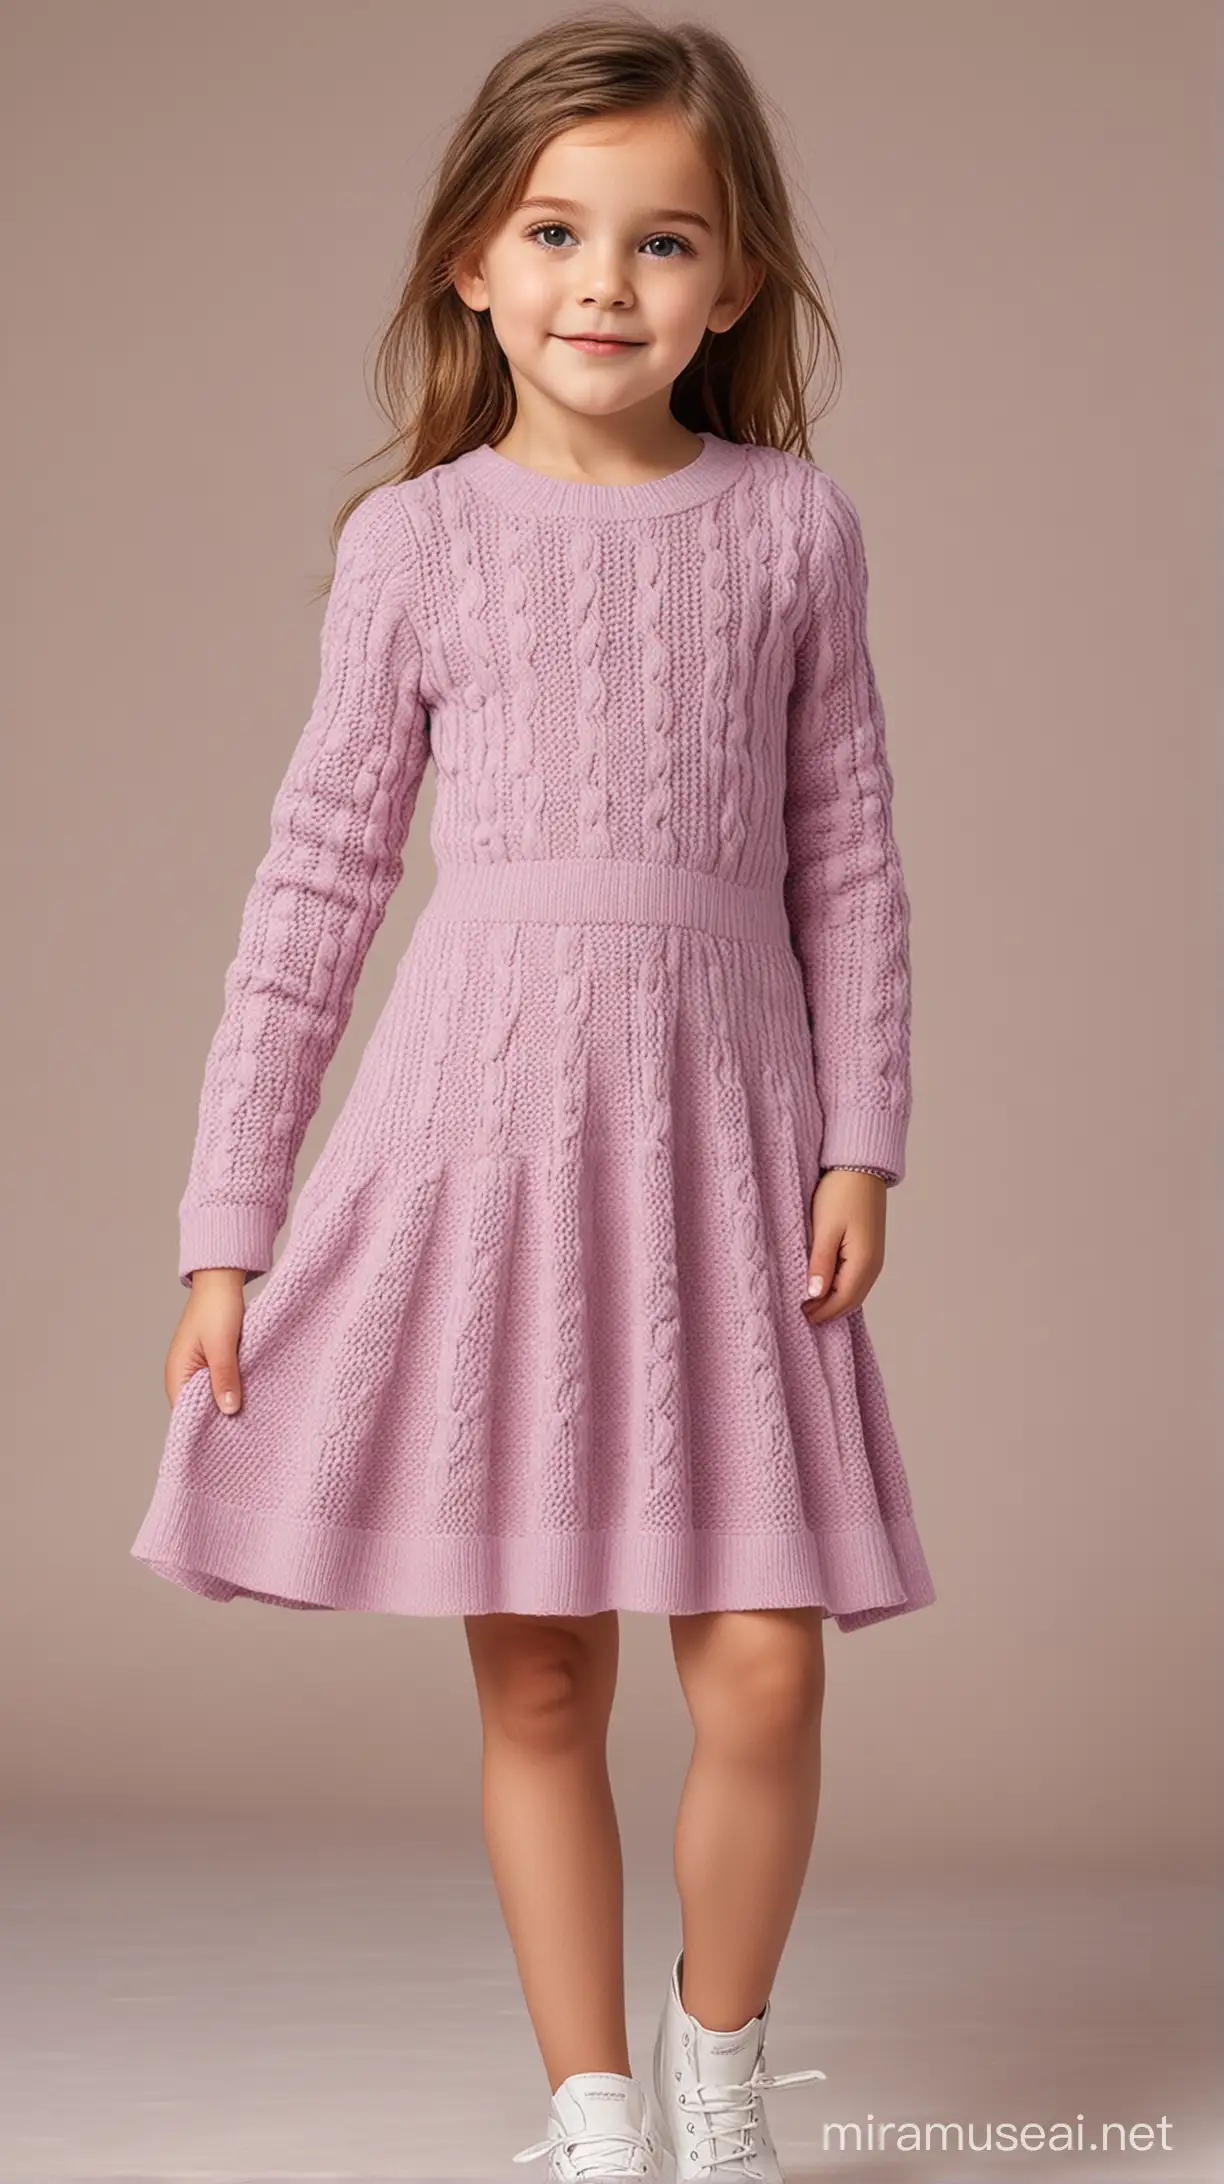 Fashionable LongSleeved Sweater Dress with Sweet and Cool Style in Light Purple